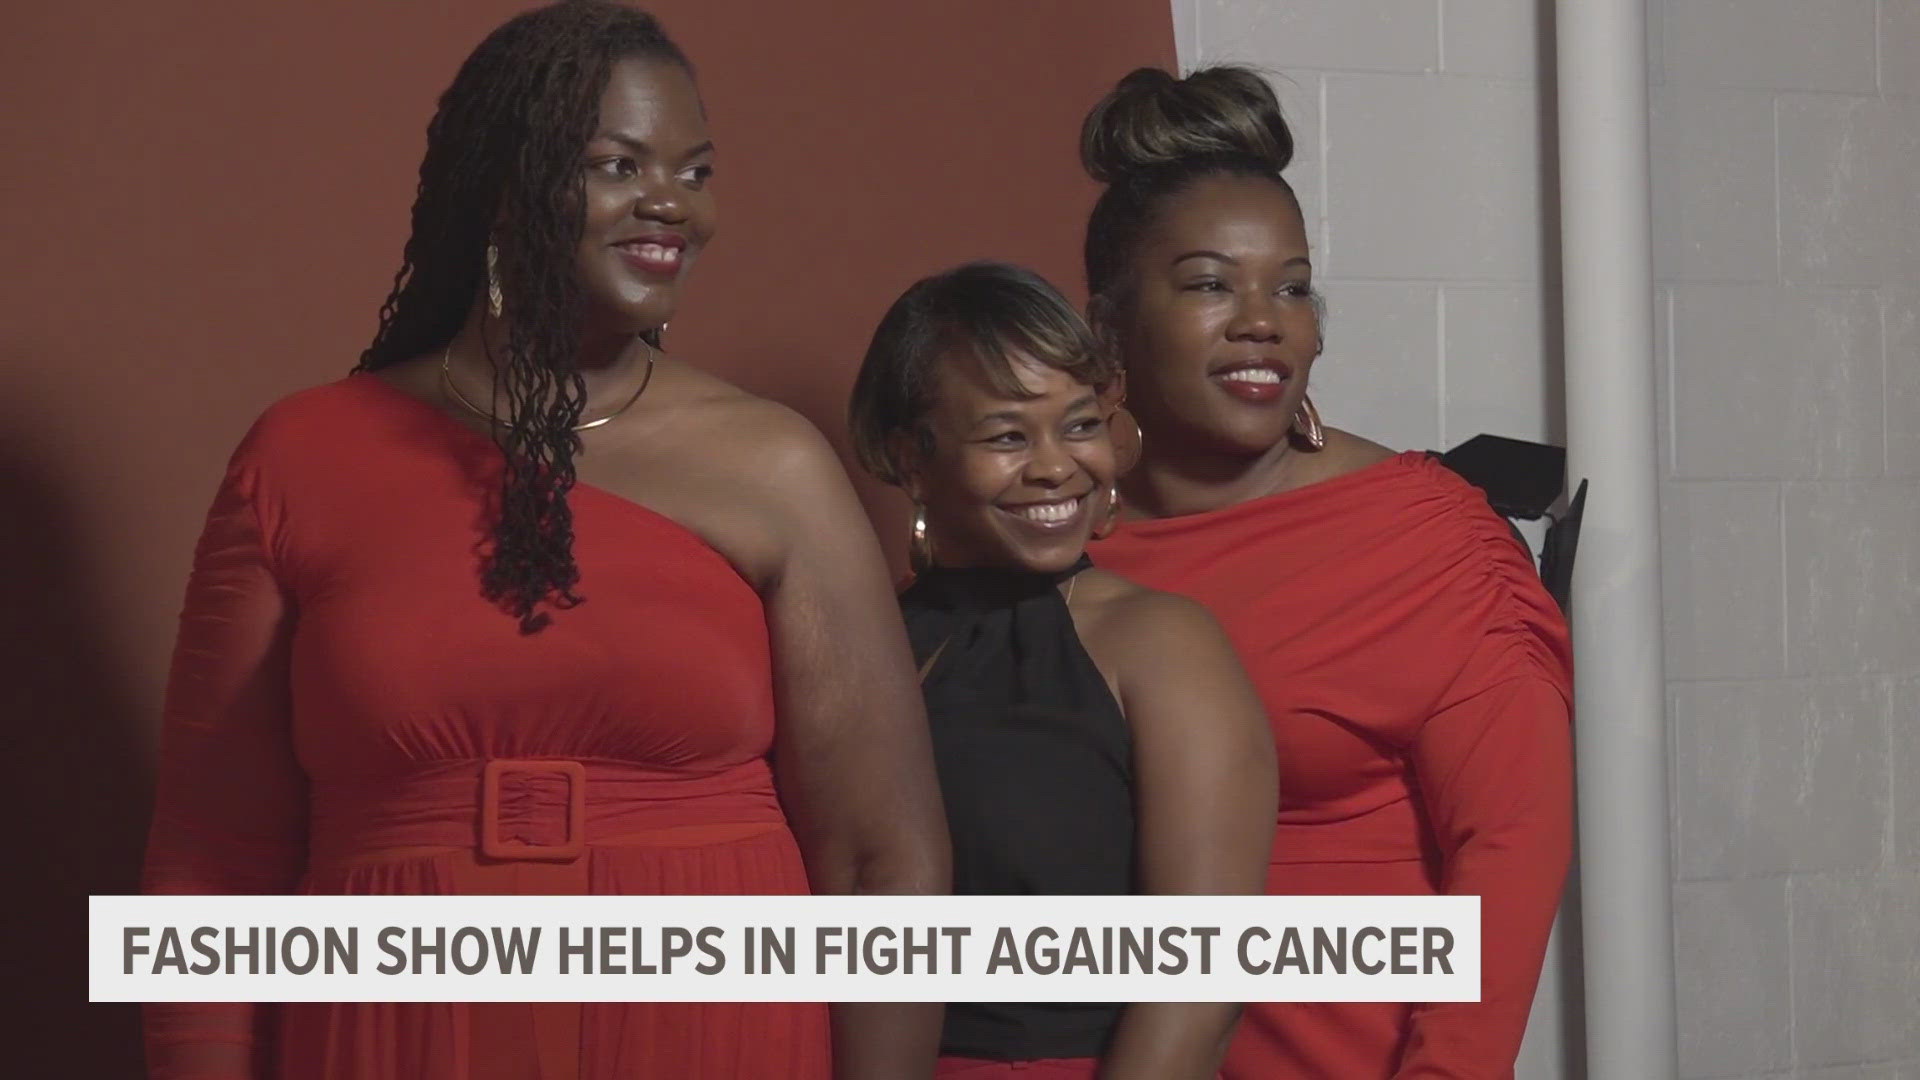 Fashion show helps in fight against cancer.